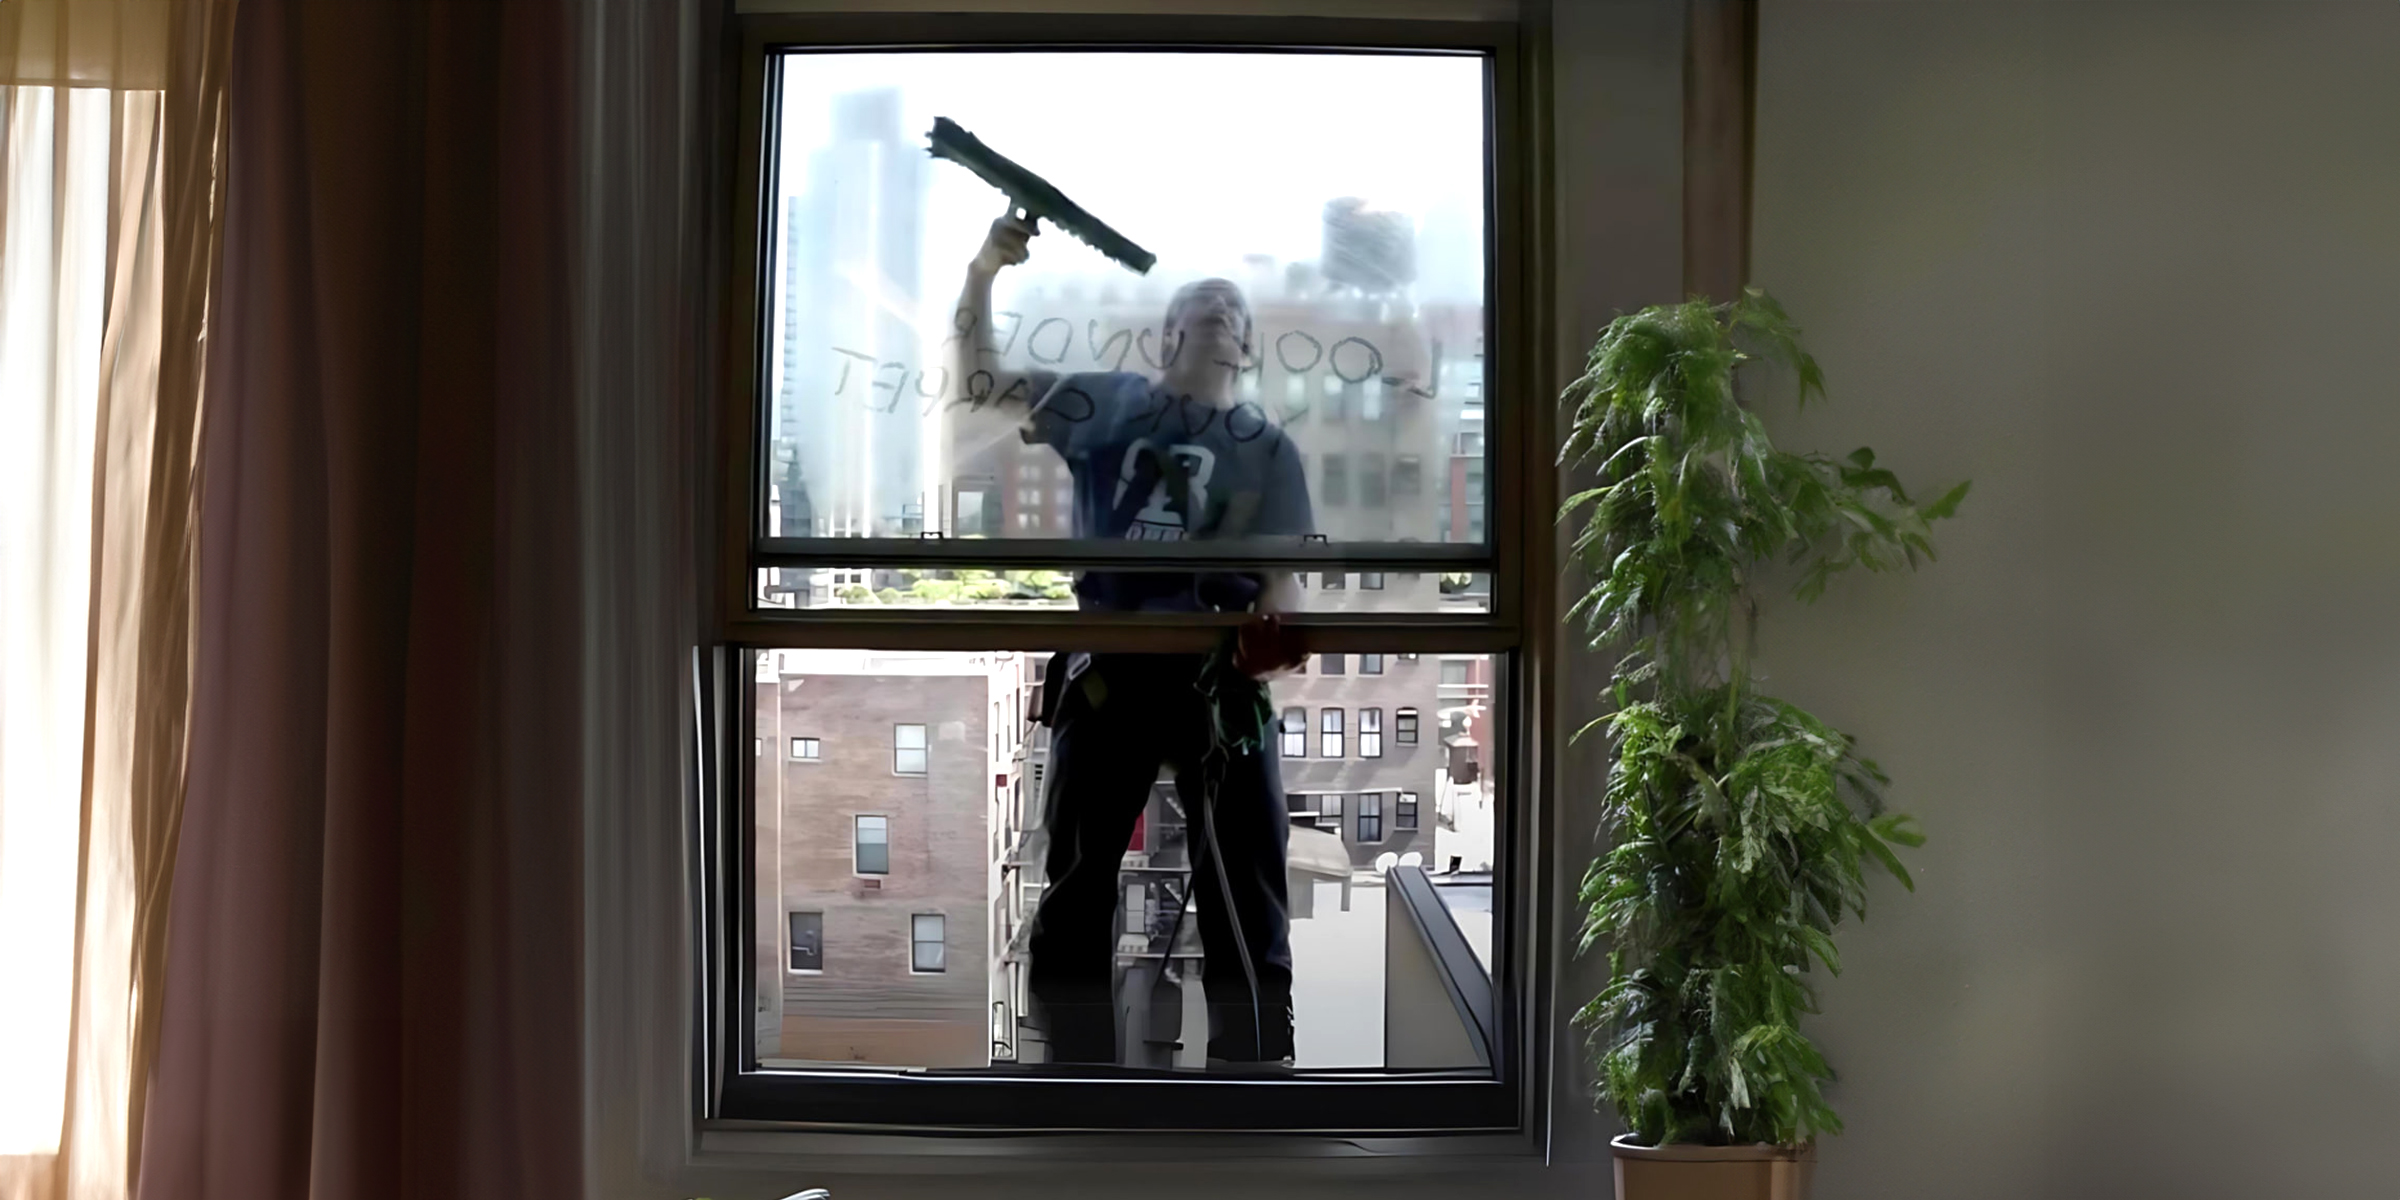 A person cleaning a window | Source: Amomama